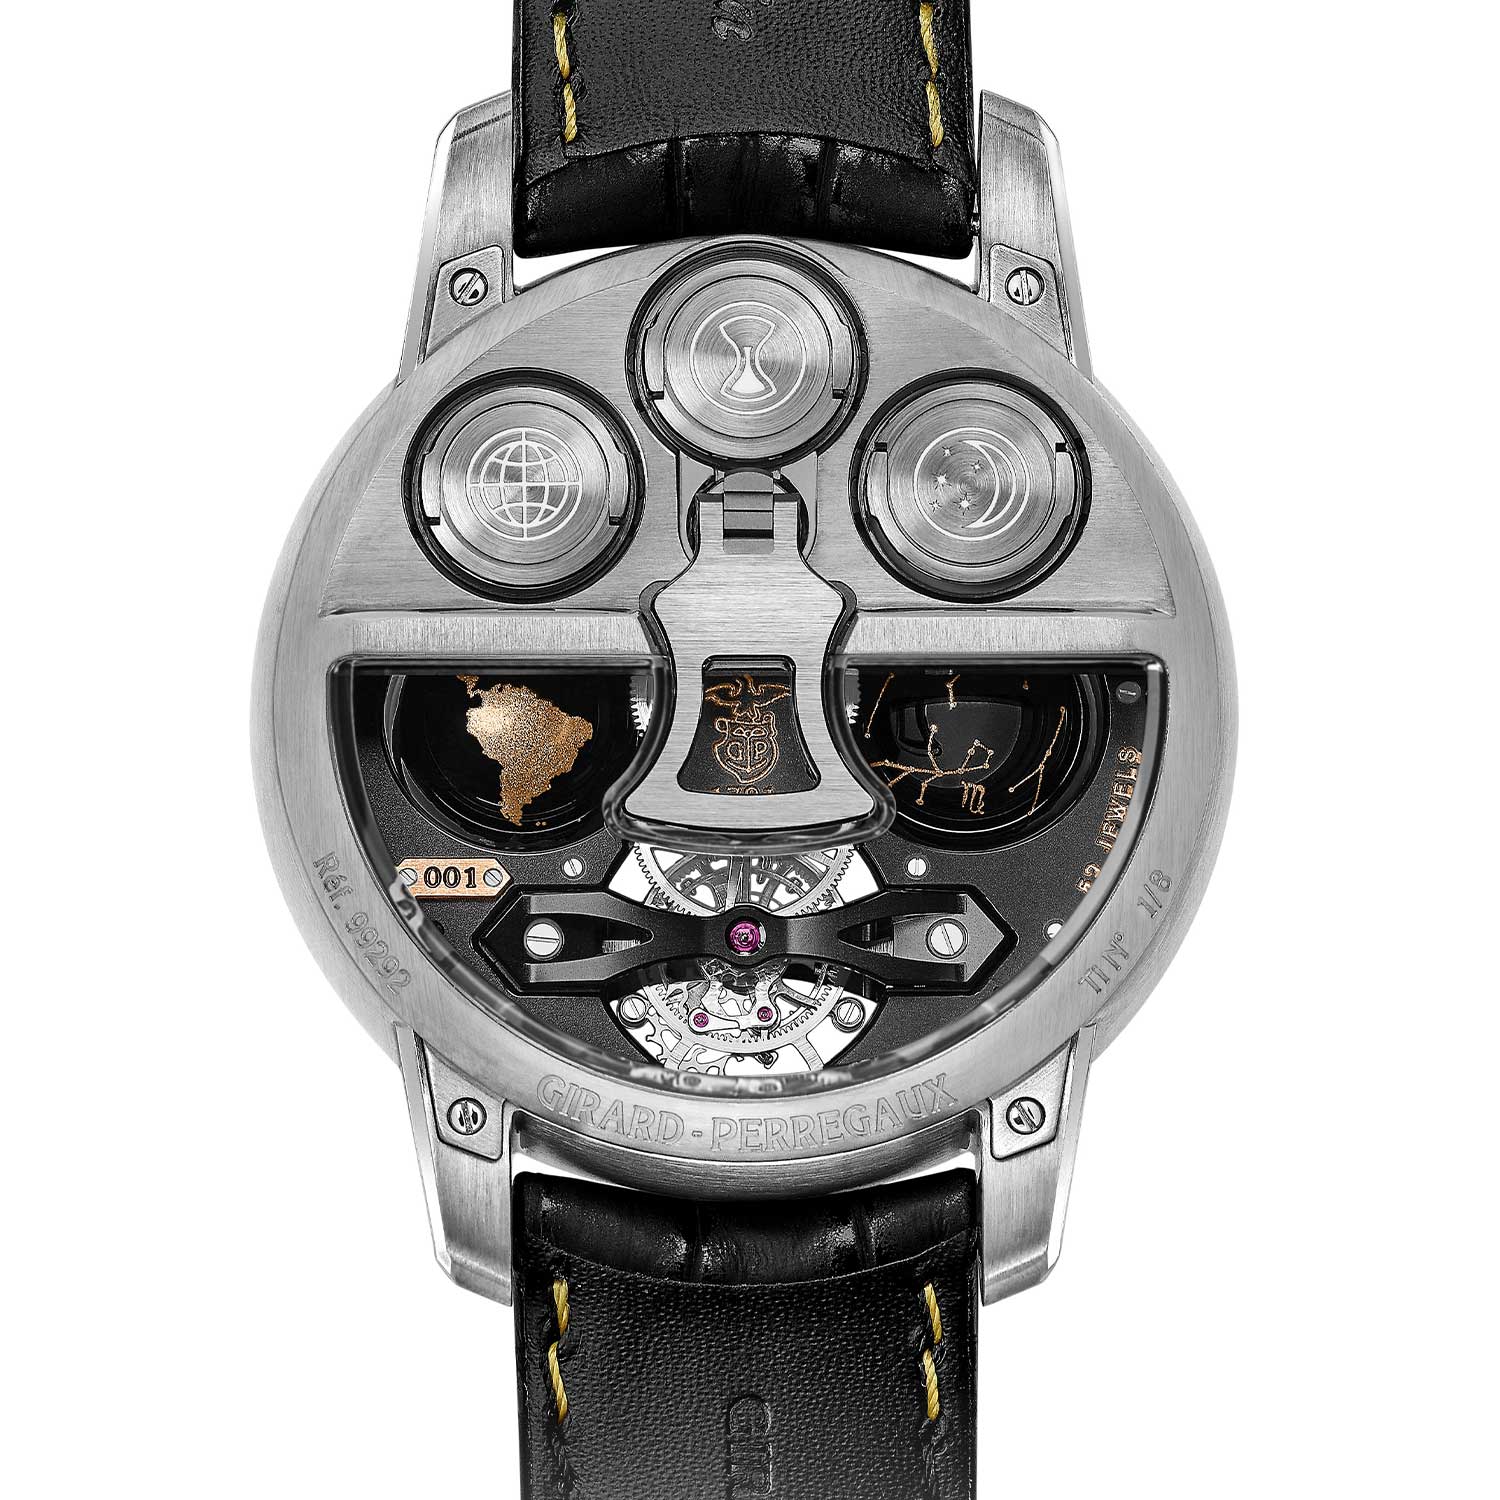 Caseback of this year's new Cosmos Infinity edition